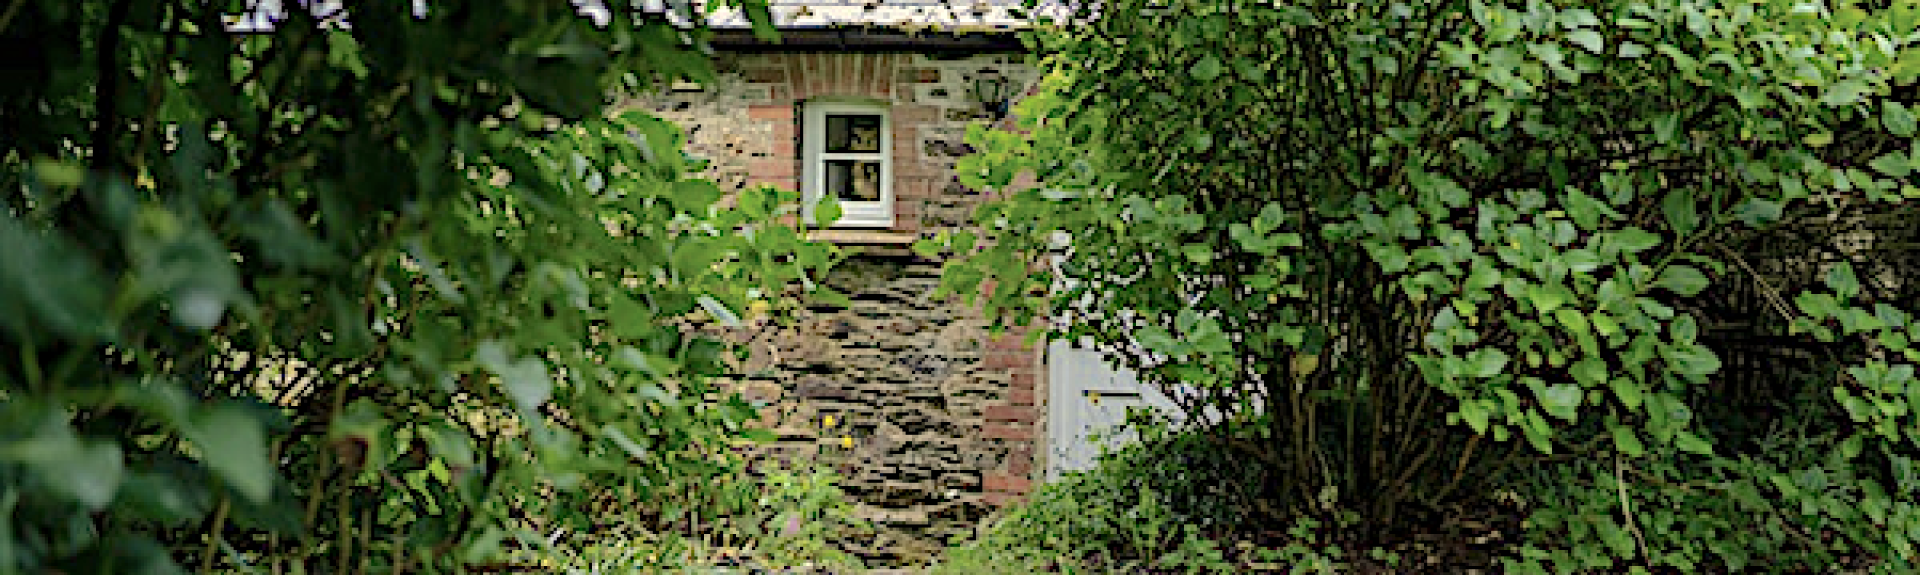 A glimpse of a cottage wall and window peeping through a gap between bushes.